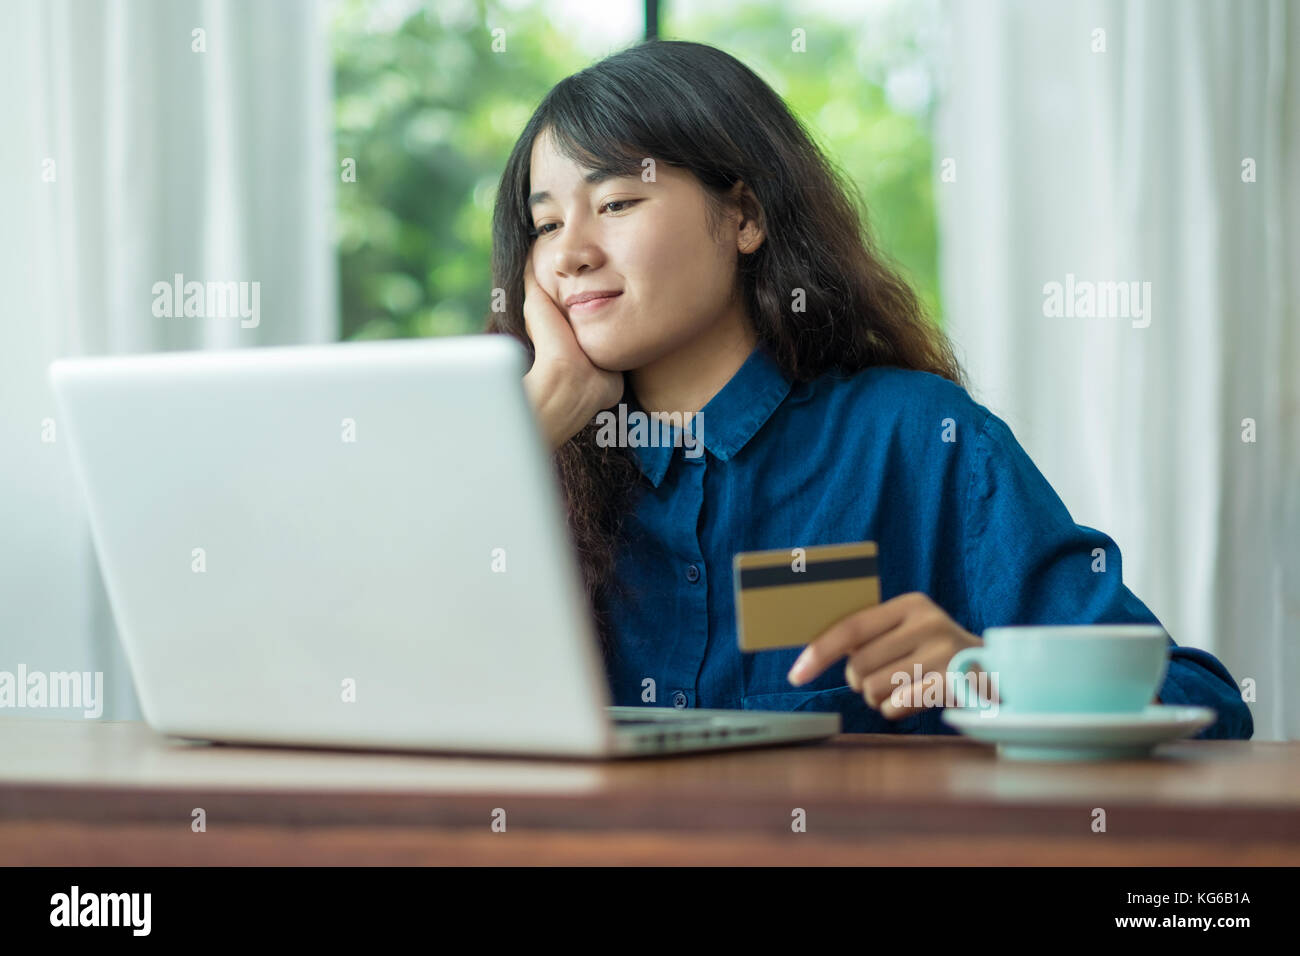 asia woman online shopping using credit card with laptop computer on wood table at cafe restaurant,Digital lifestyle concept Stock Photo